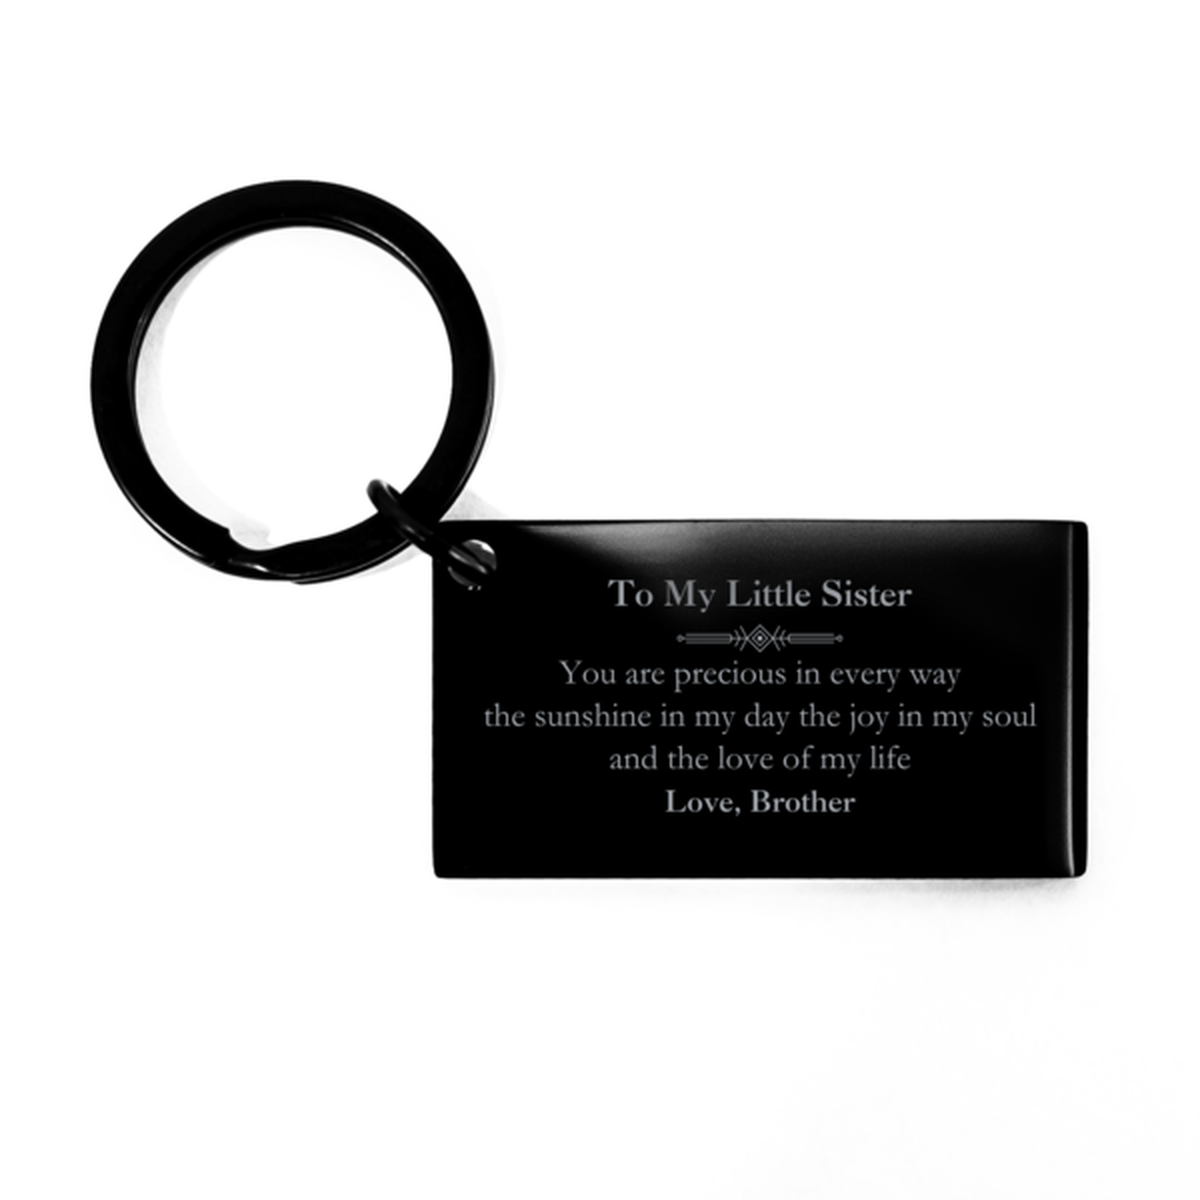 Graduation Gifts for Little Sister Keychain Present from Brother, Christmas Little Sister Birthday Gifts Little Sister You are precious in every way the sunshine in my day. Love, Brother